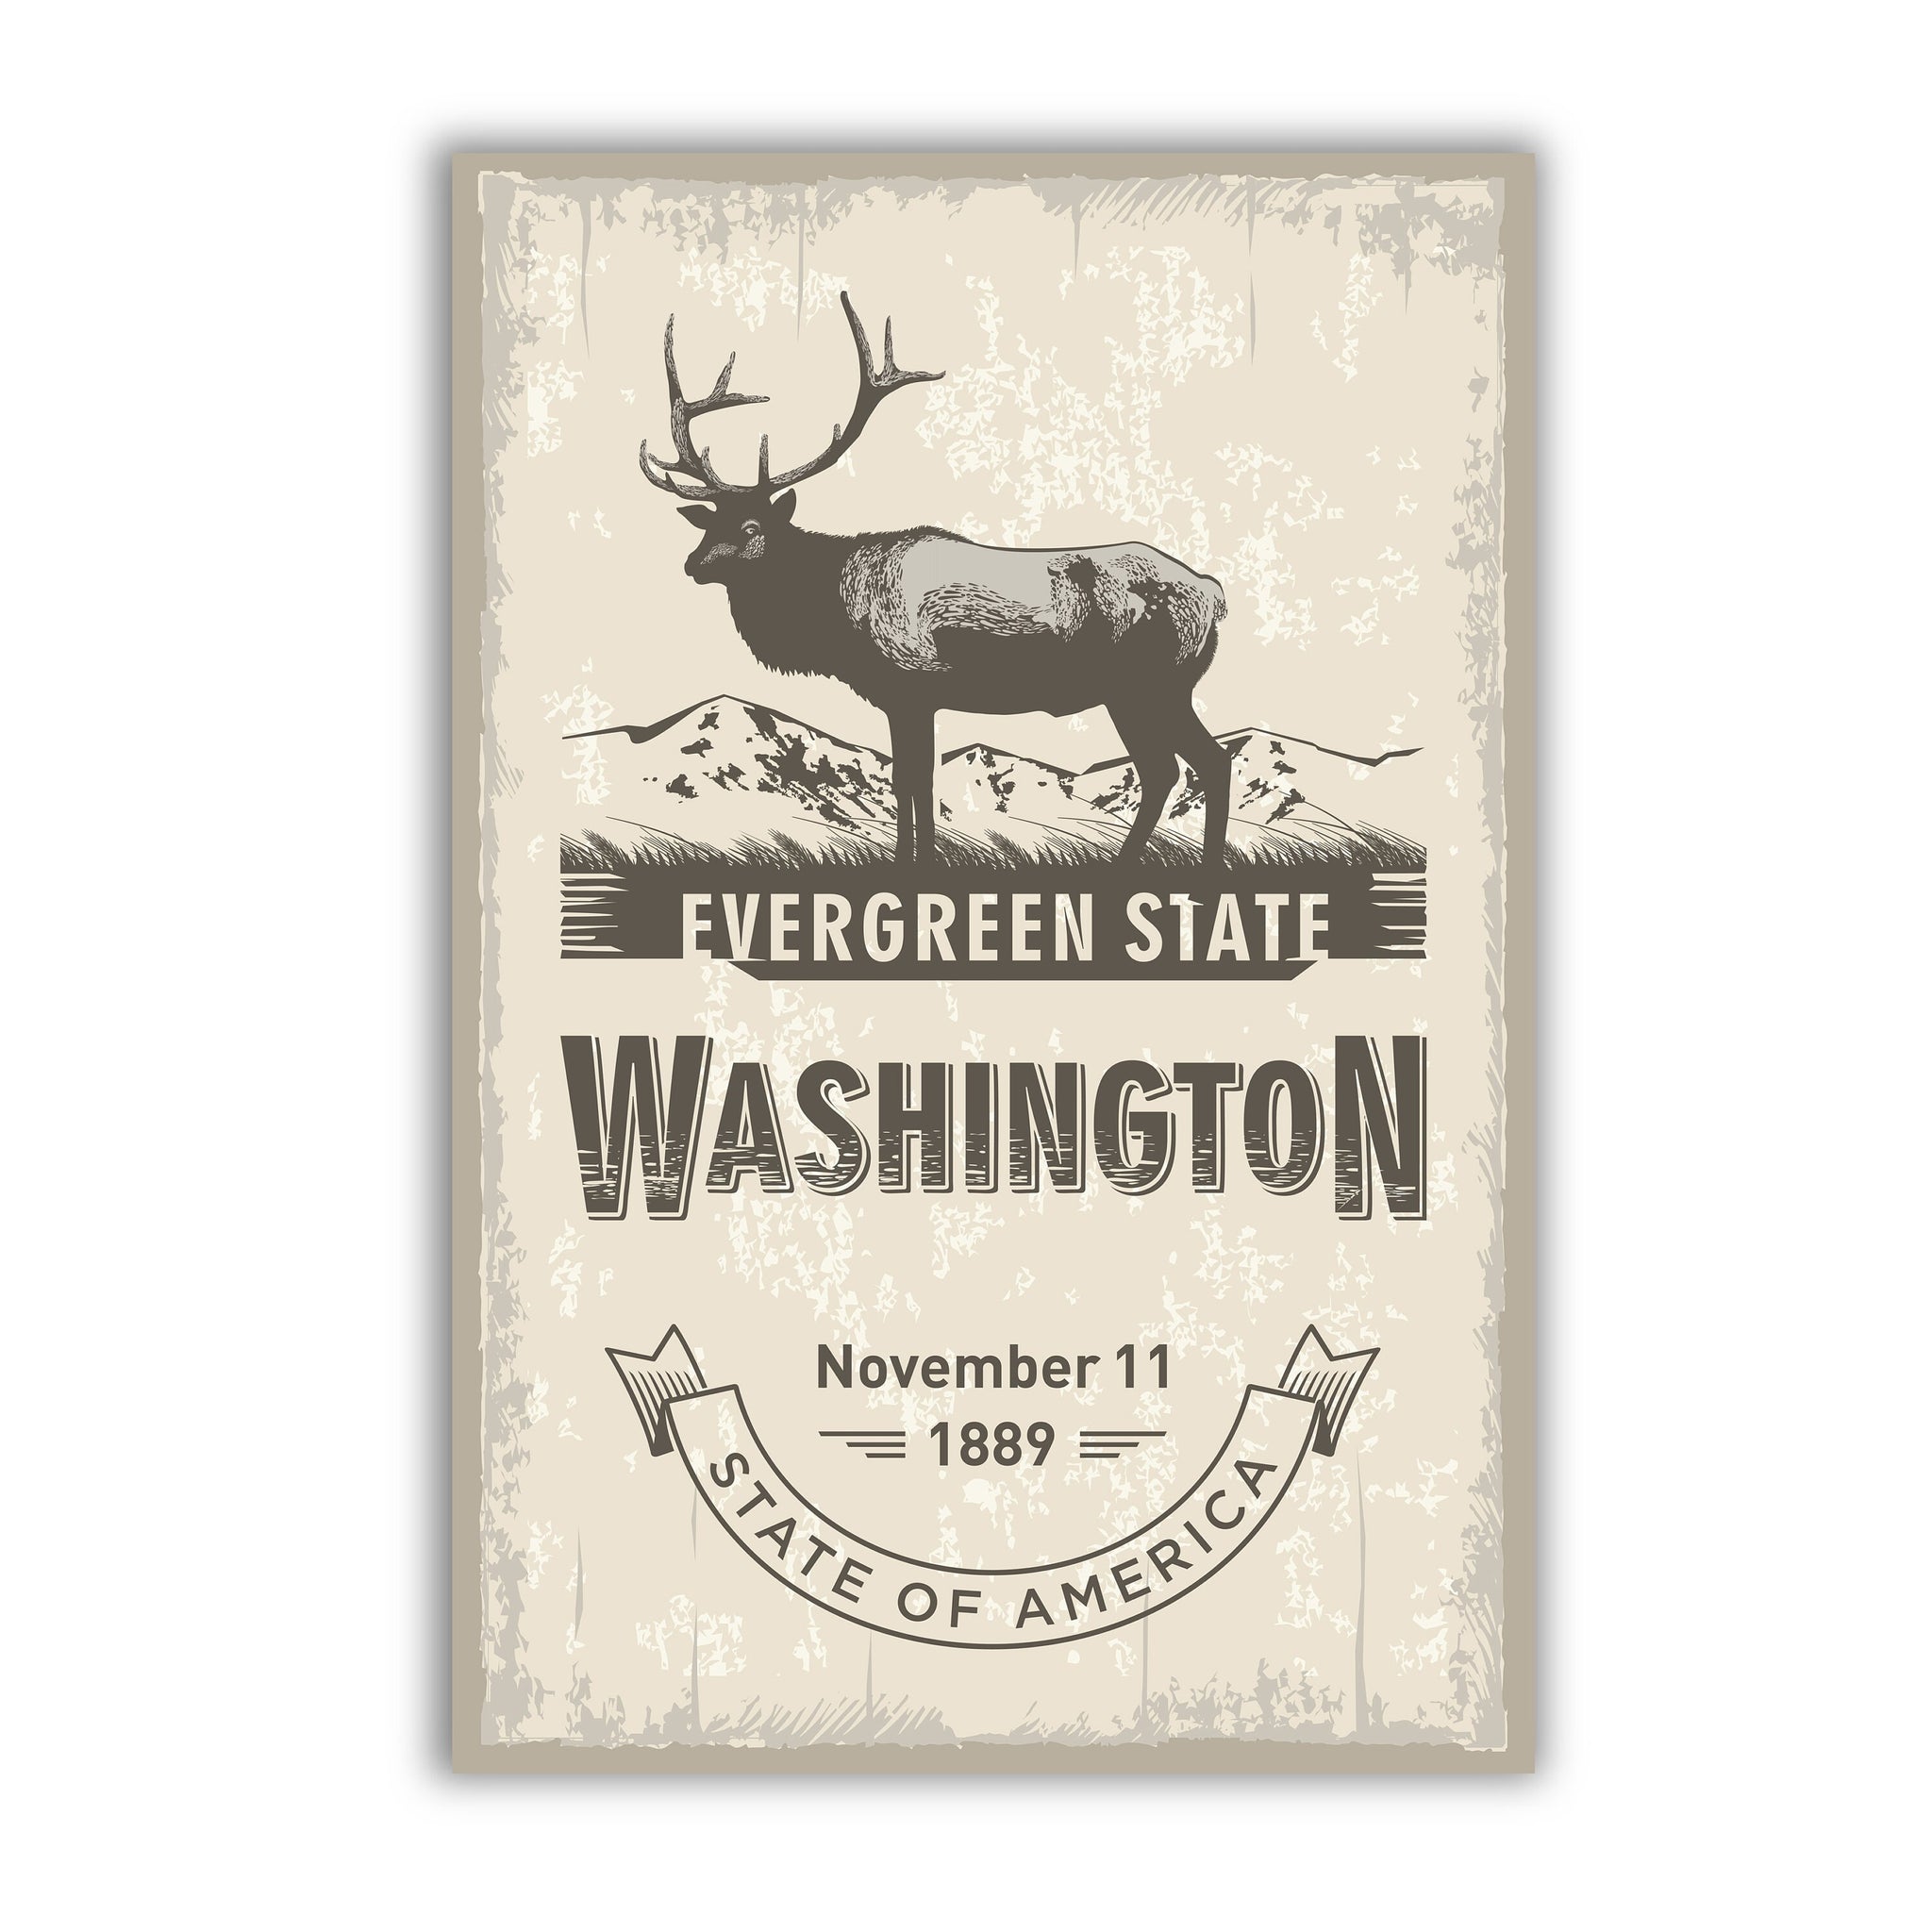 Washington State Symbol Poster, Washington Poster Print, Washington State Emblem Poster, Retro Travel State Poster, Home and Office Wall Art